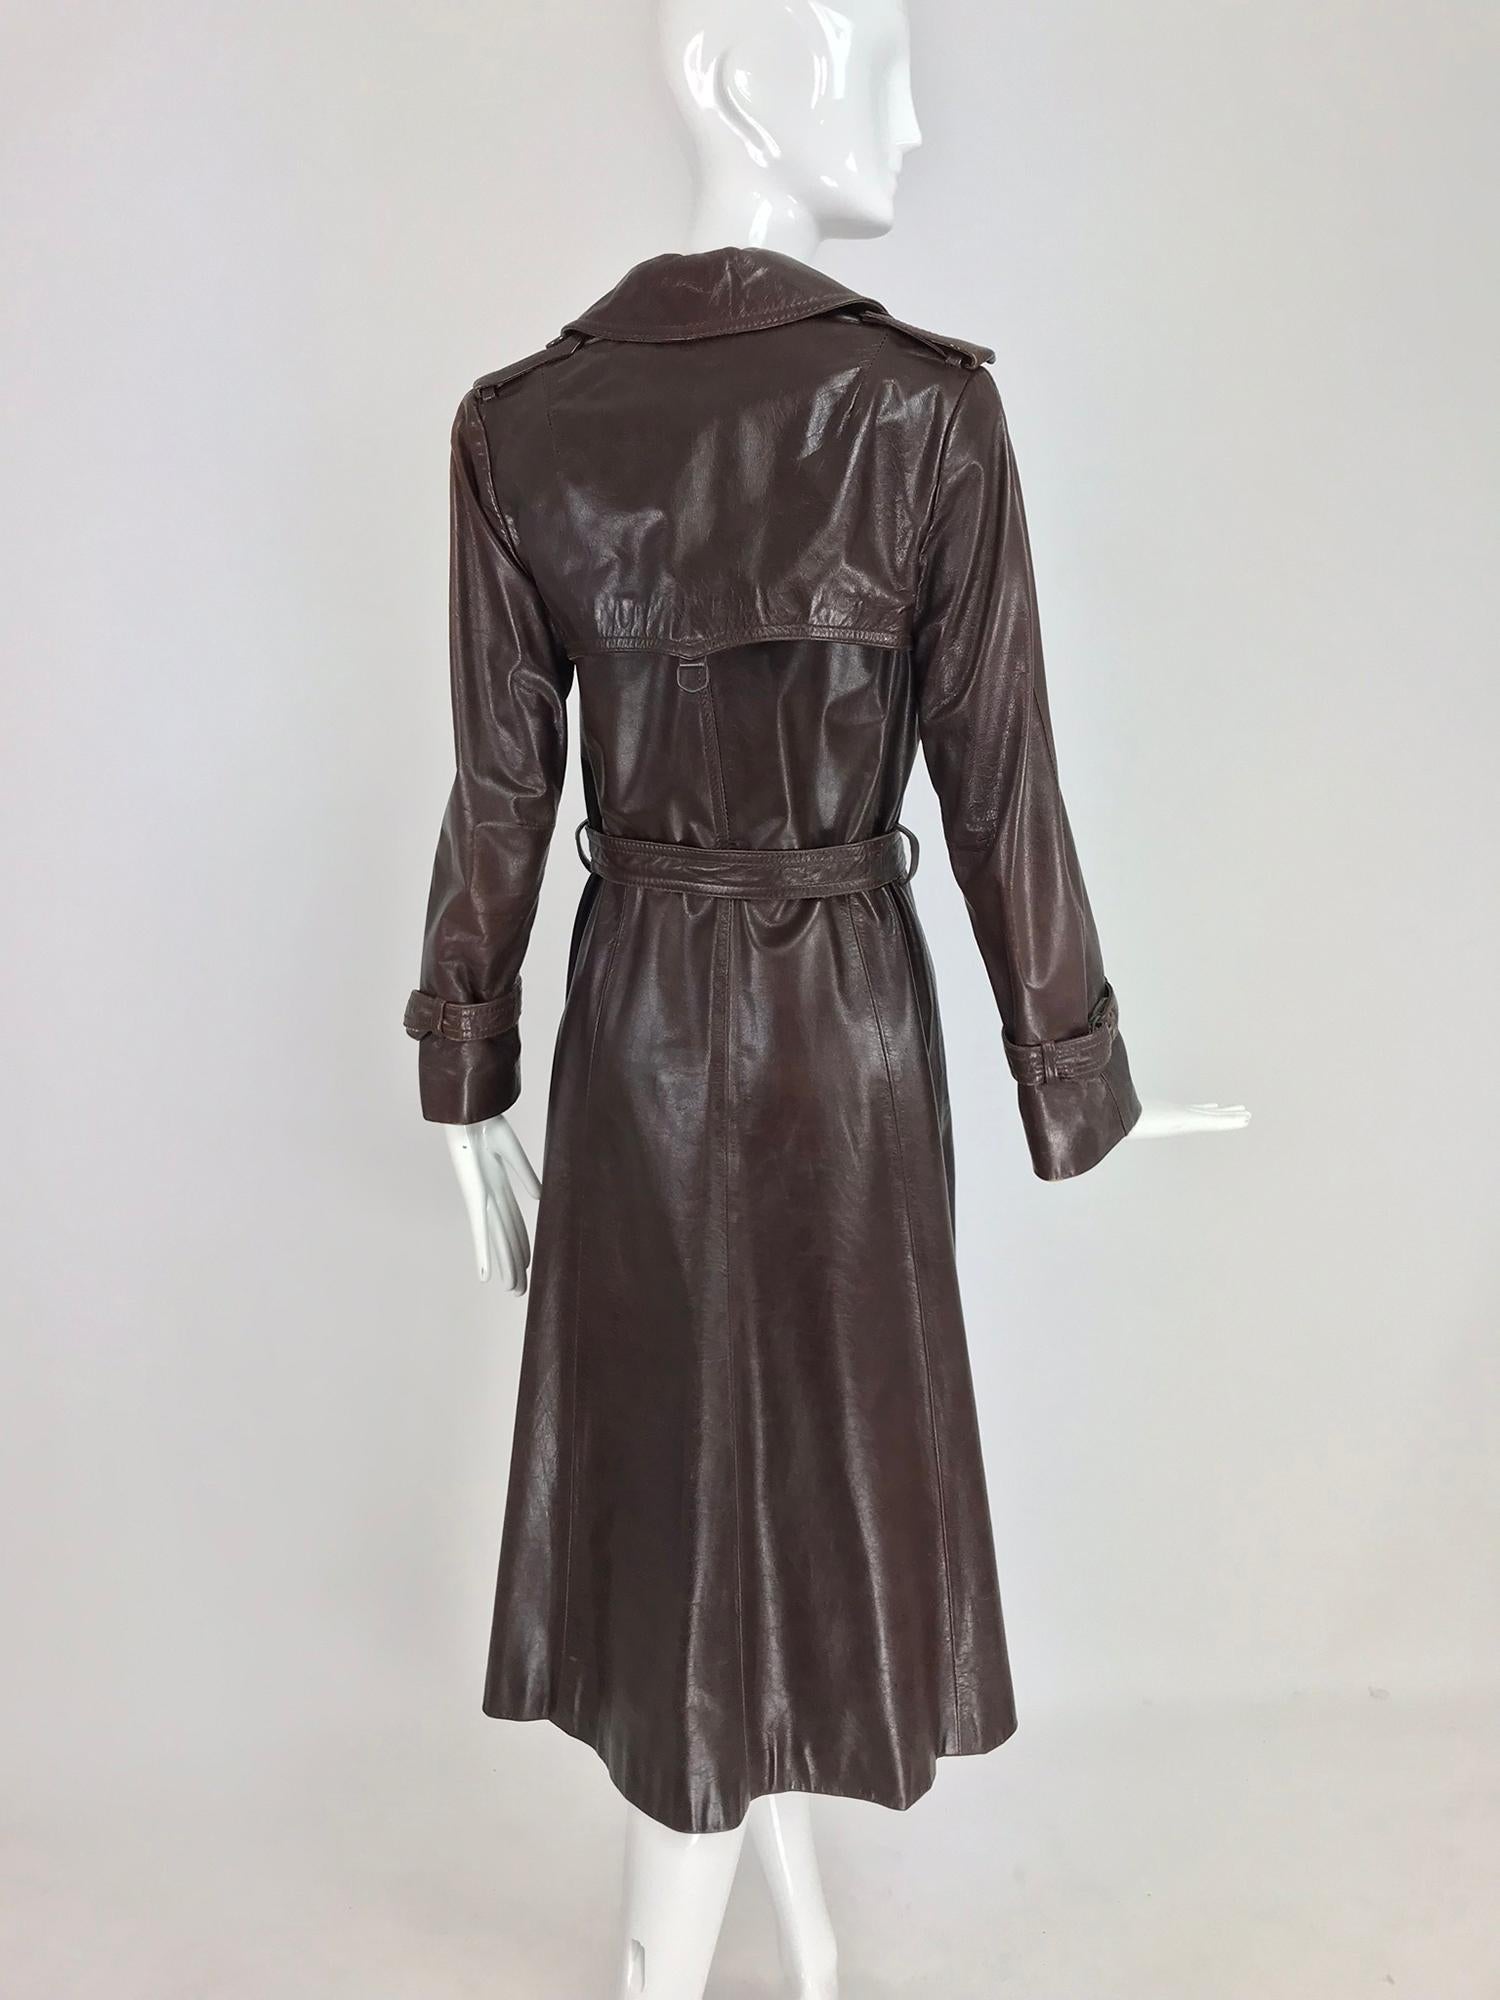 Anne Klein Chocolate brown leather trench coat 1970s 1